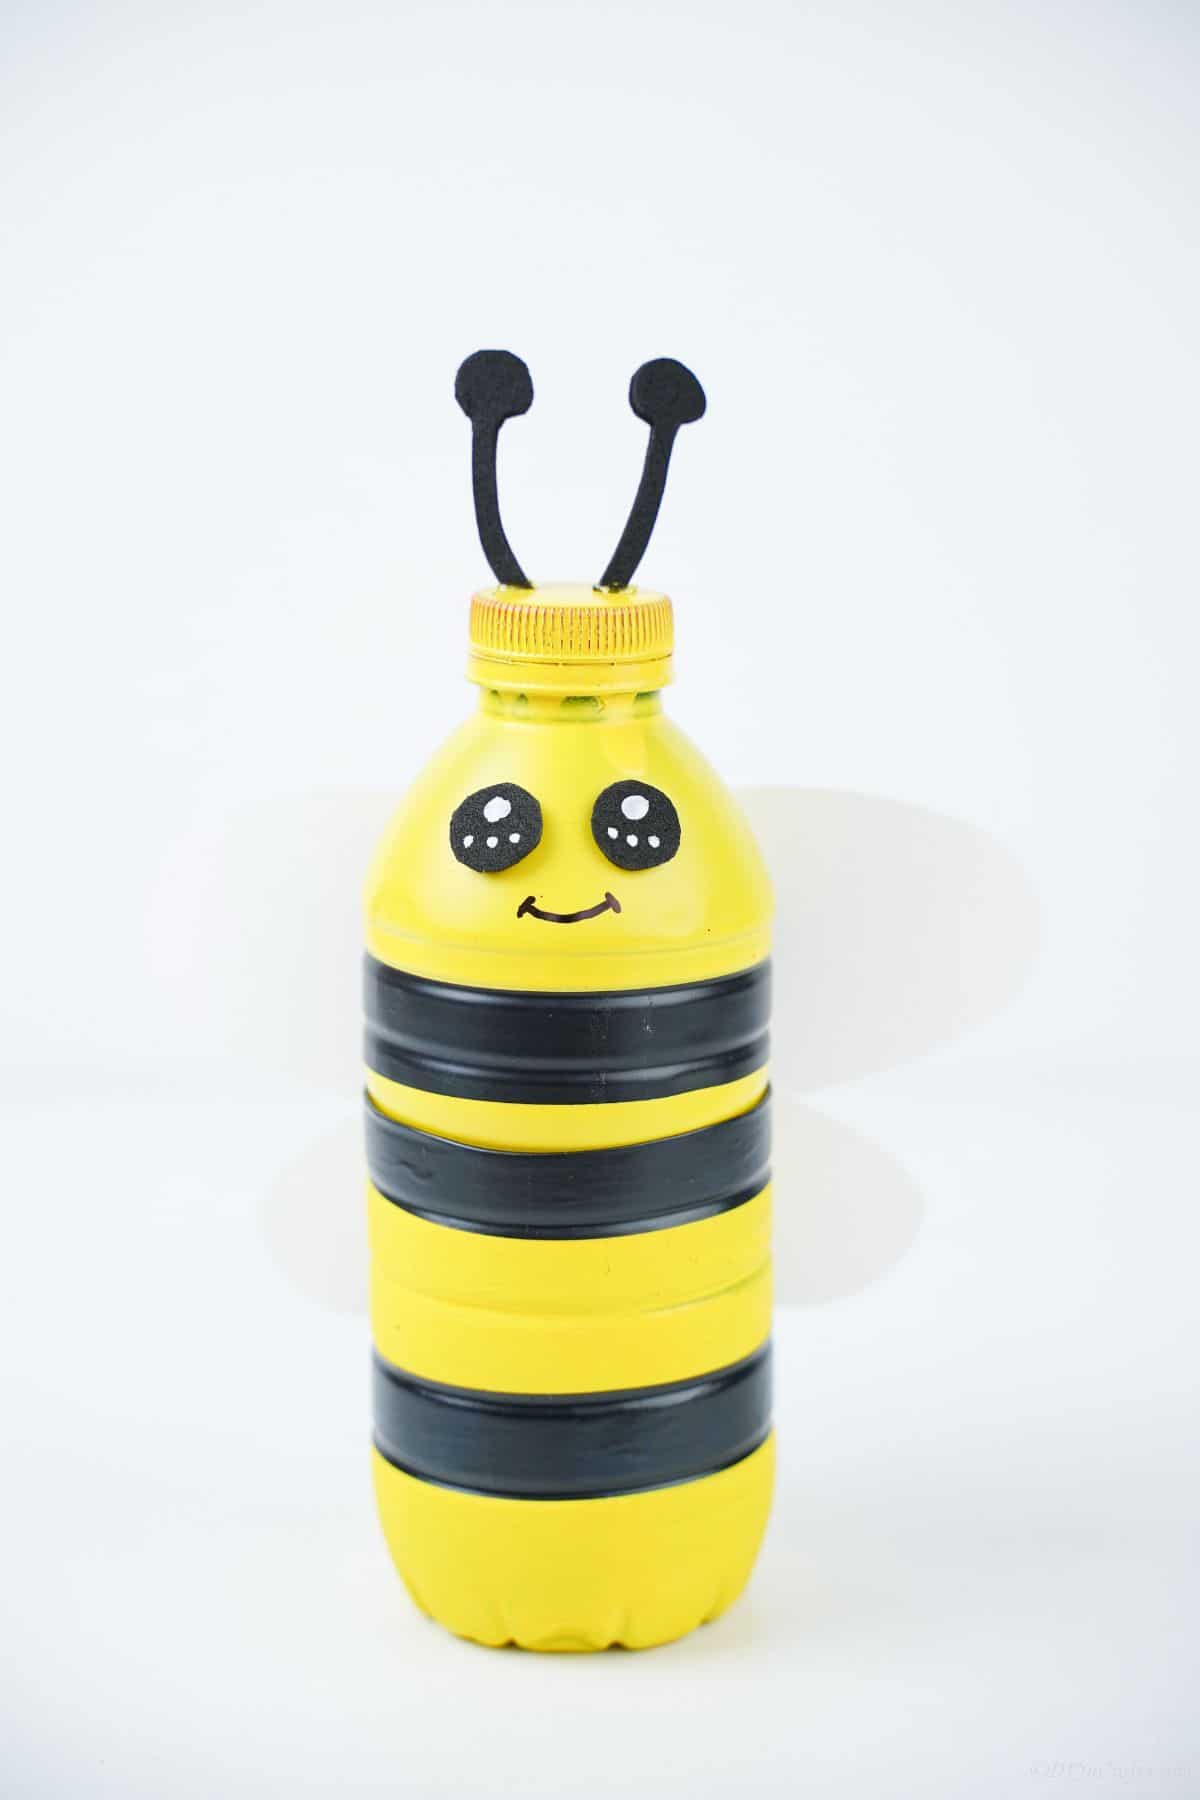 bumblebee piggy bank on white table